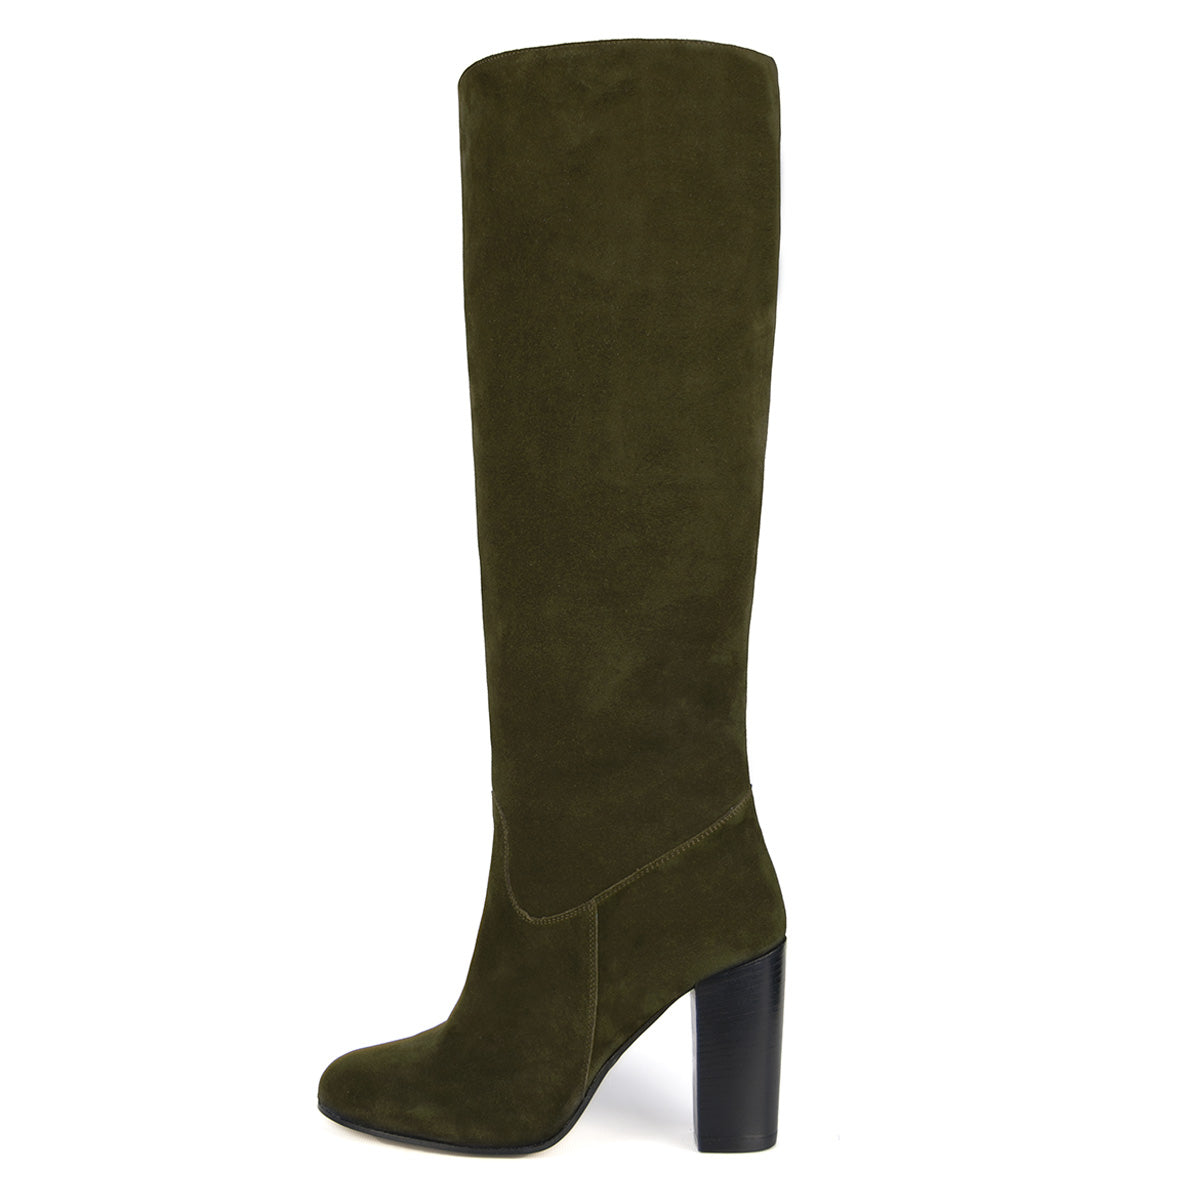 green suede boot